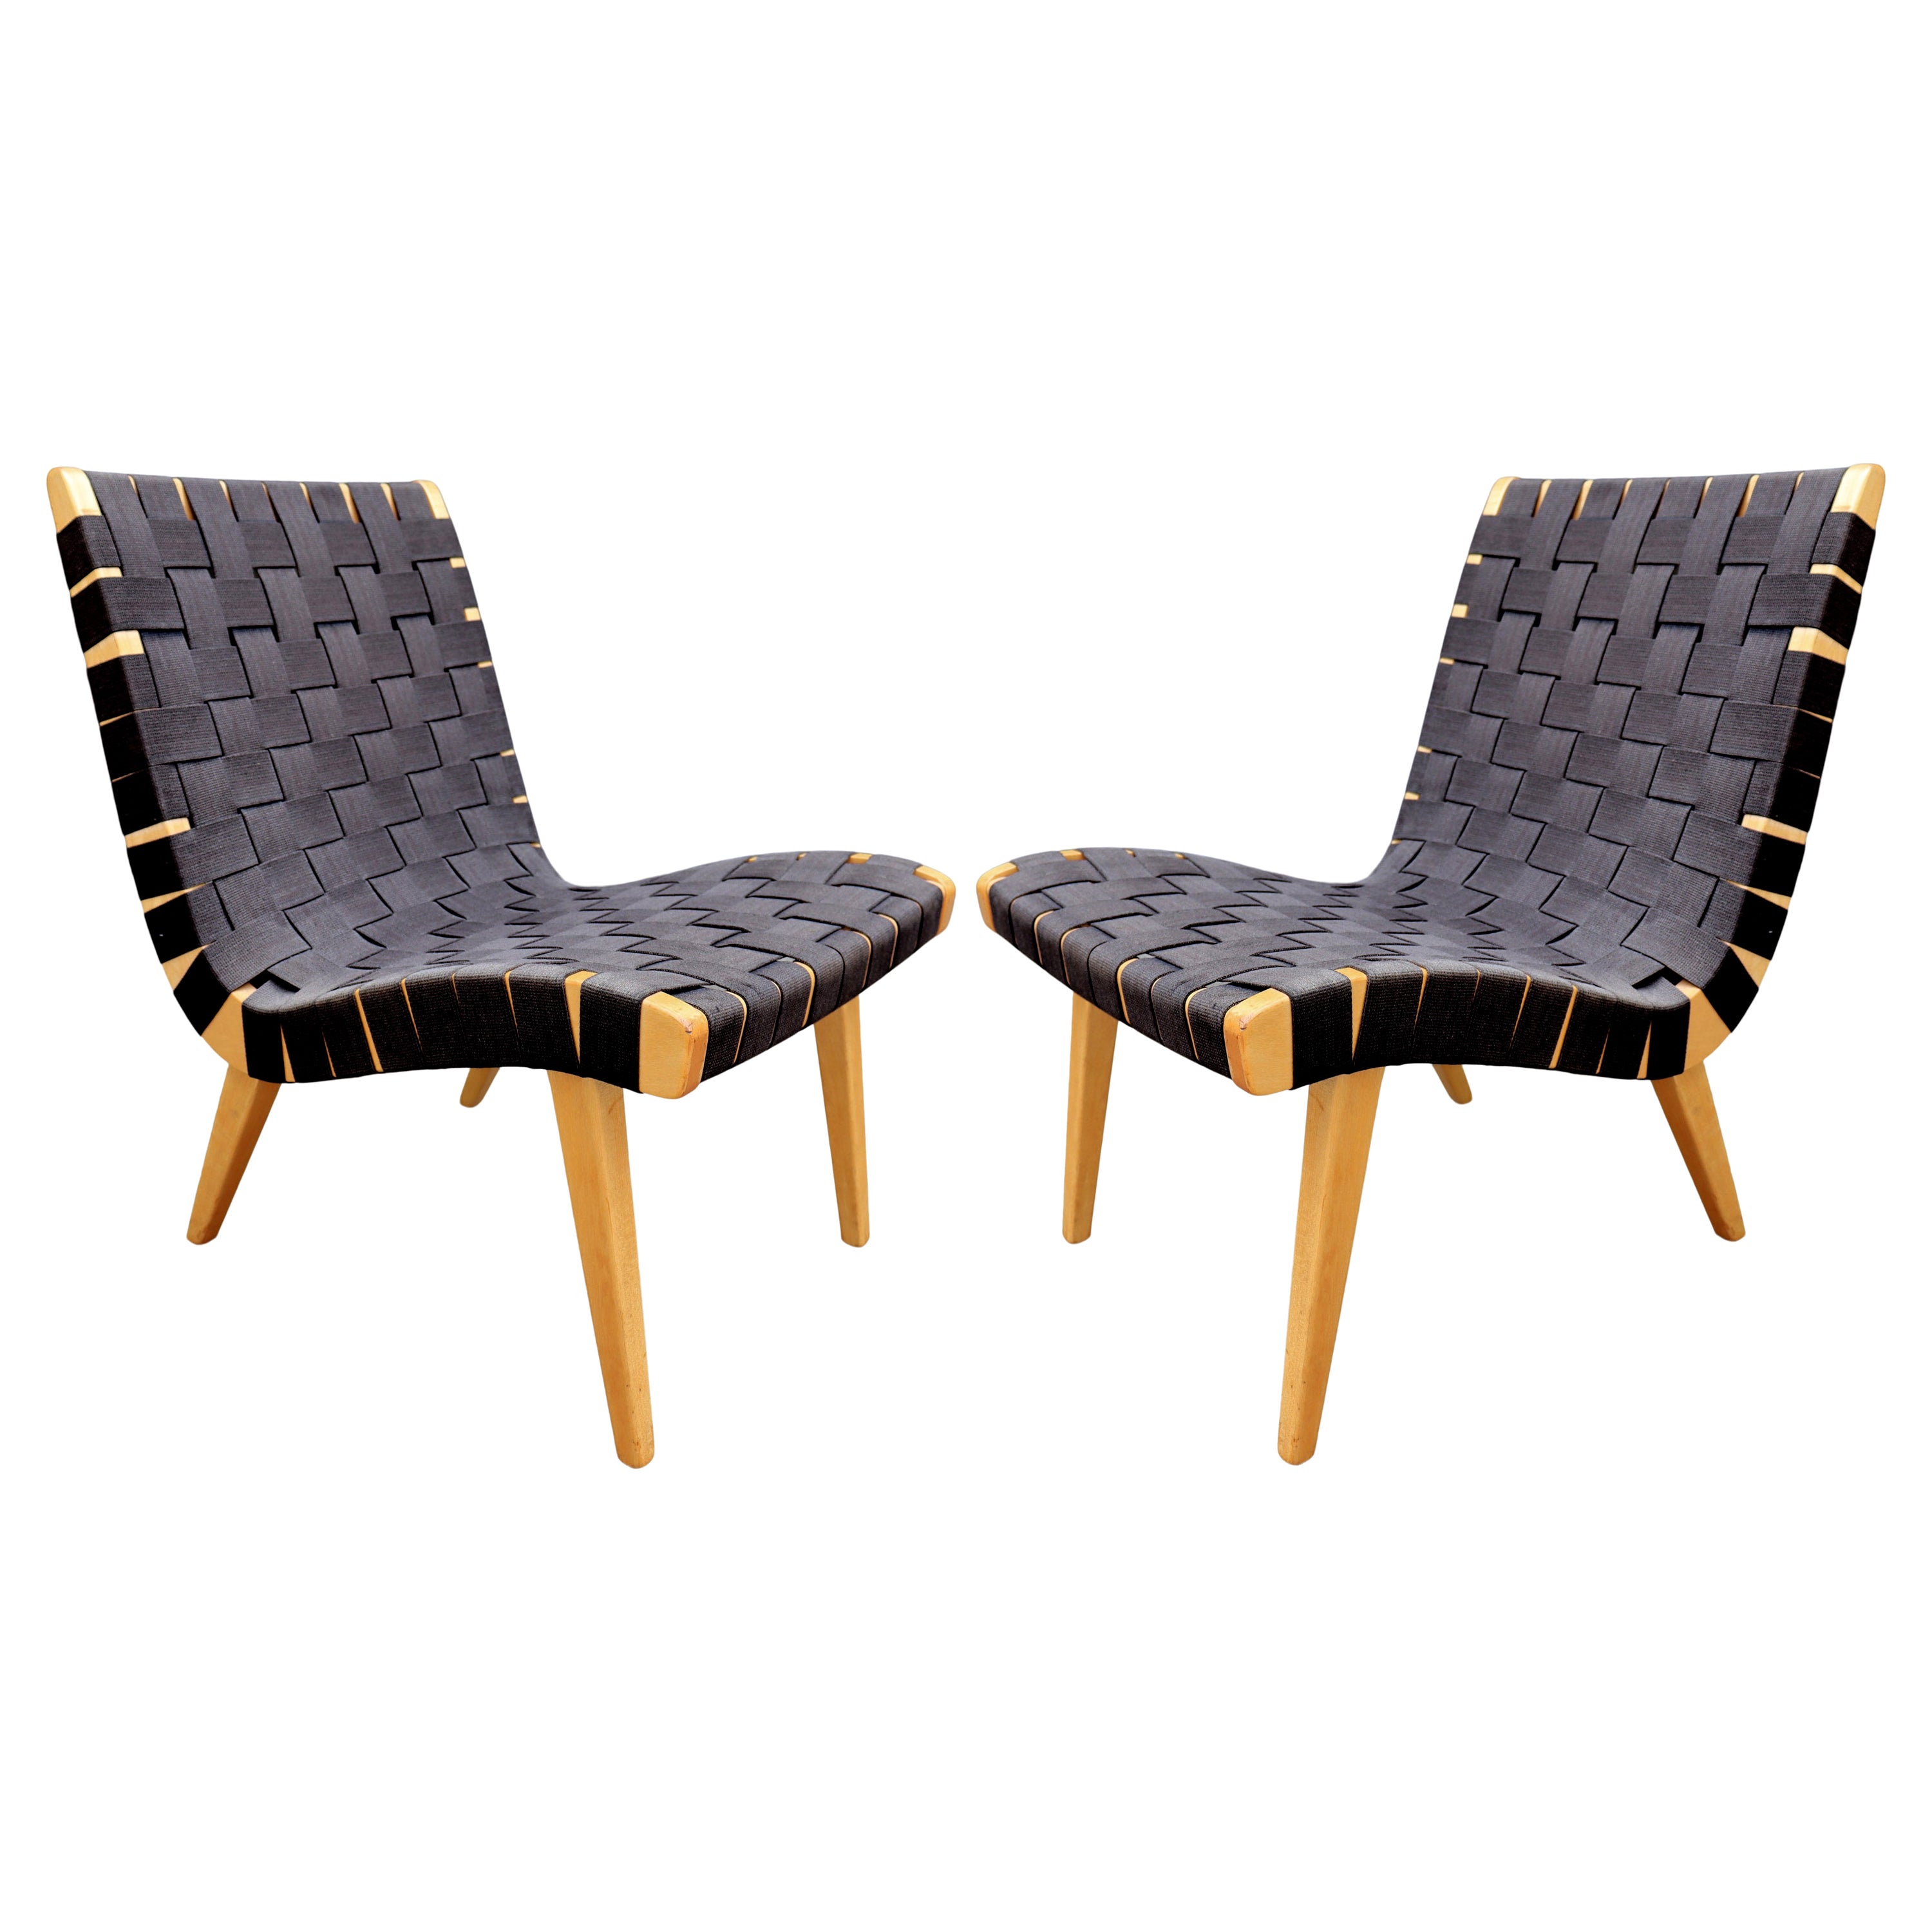 Midcentury Jens Risom Lounge Chair for Knoll